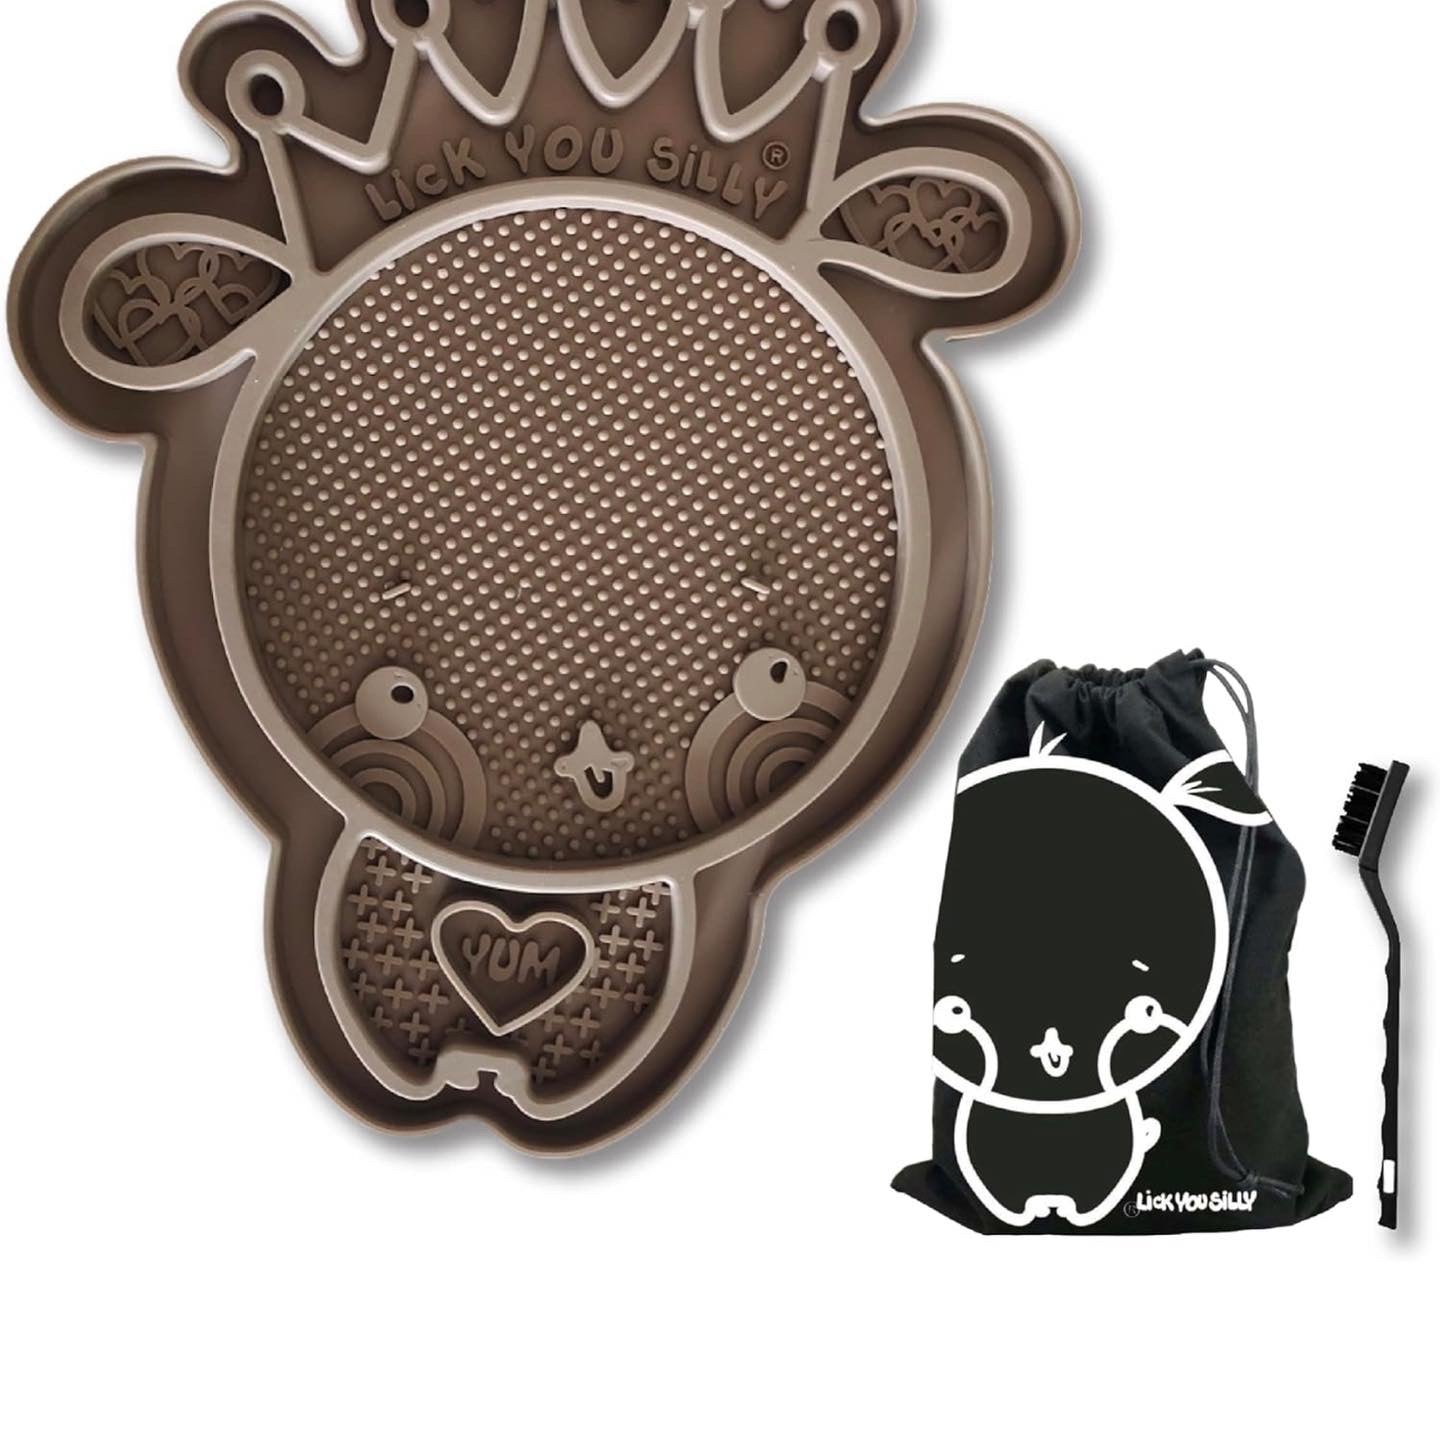 Lick You Silly Silicone Crown Lick Mat w/ Mesh Storage bag and Brush